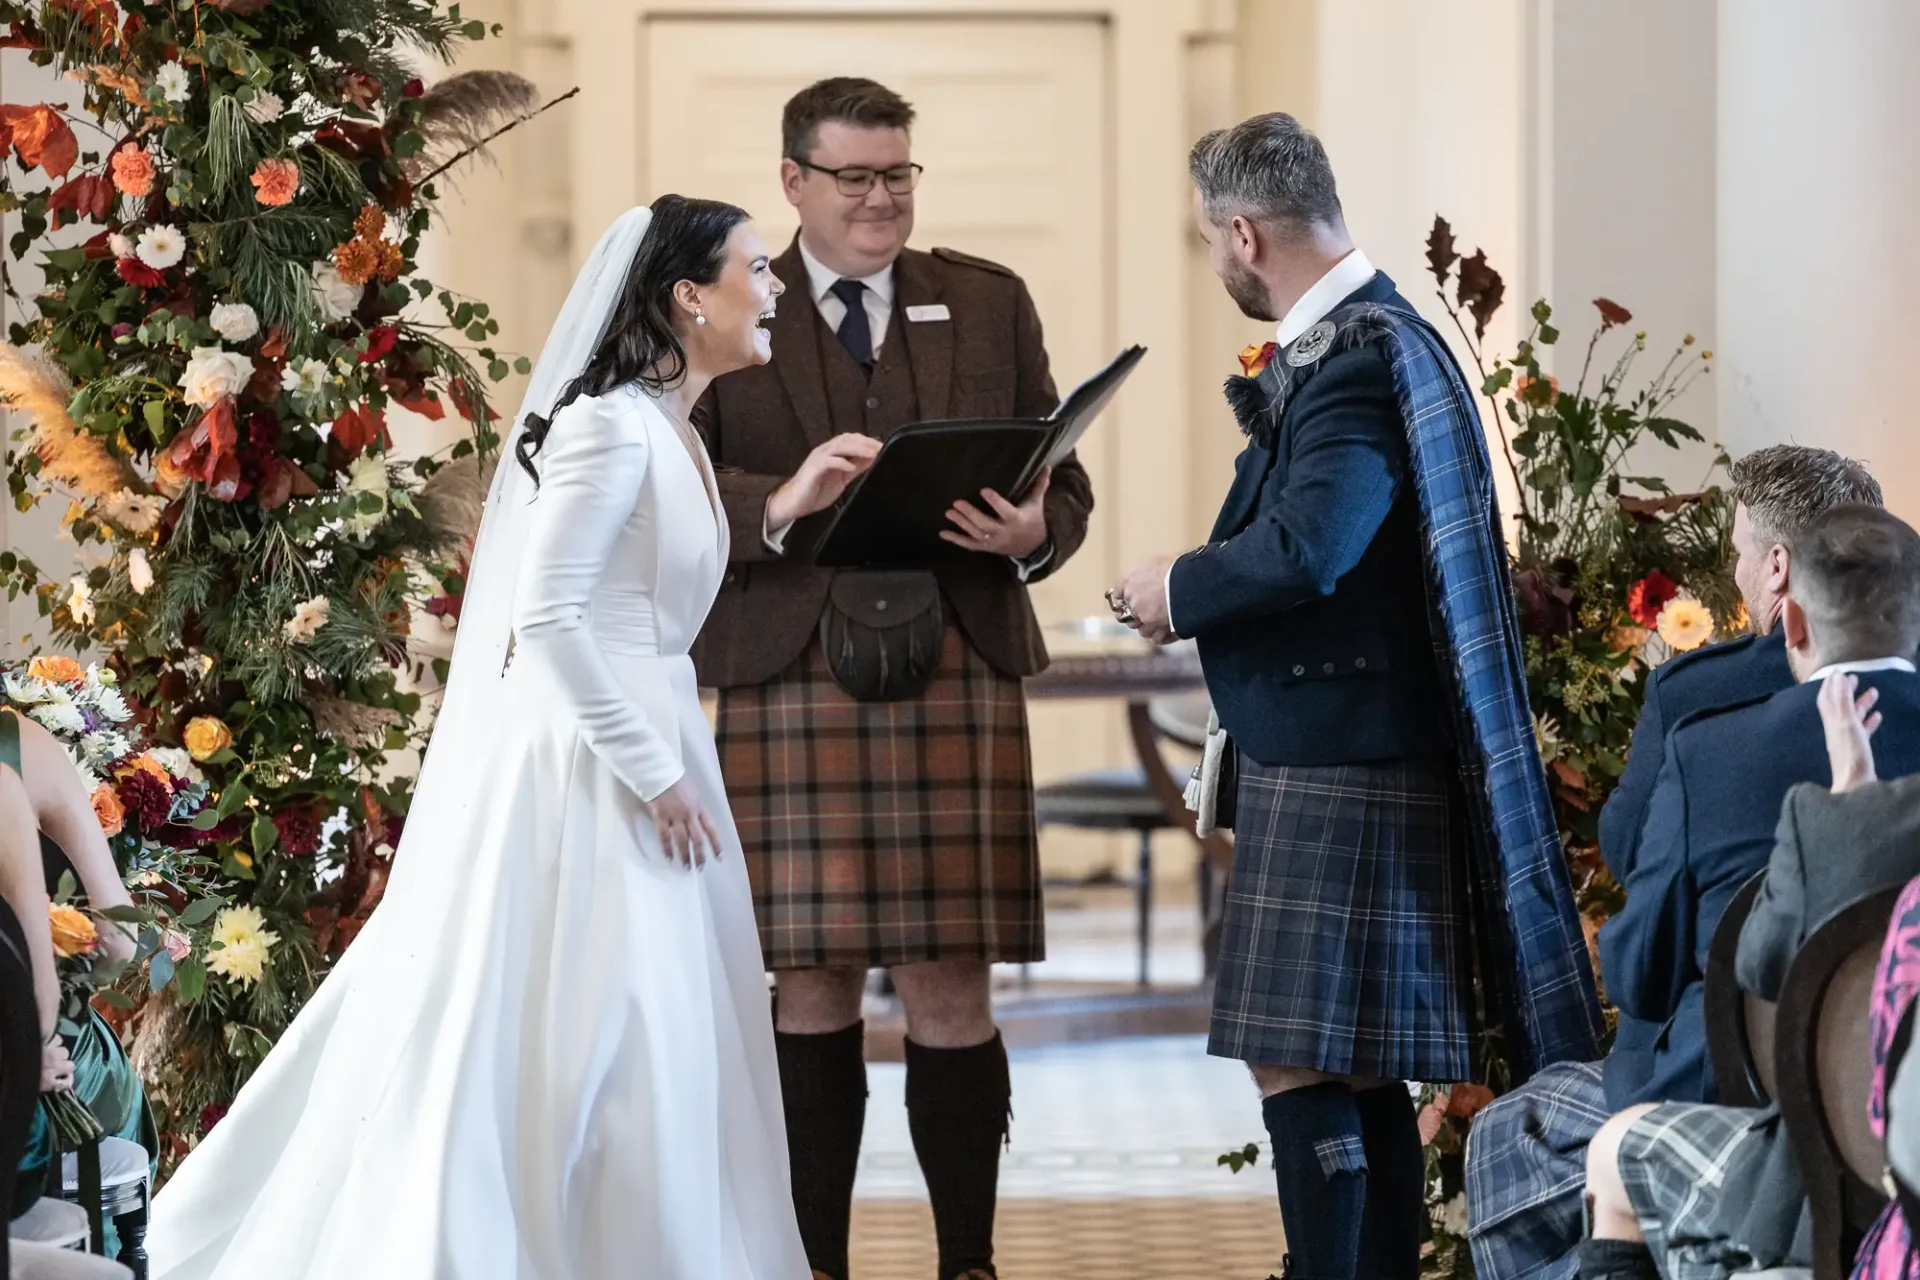 A bride in a white gown and a groom in a tartan kilt participate in a wedding ceremony indoors, officiated by a celebrant holding a book. audience members observe the event.